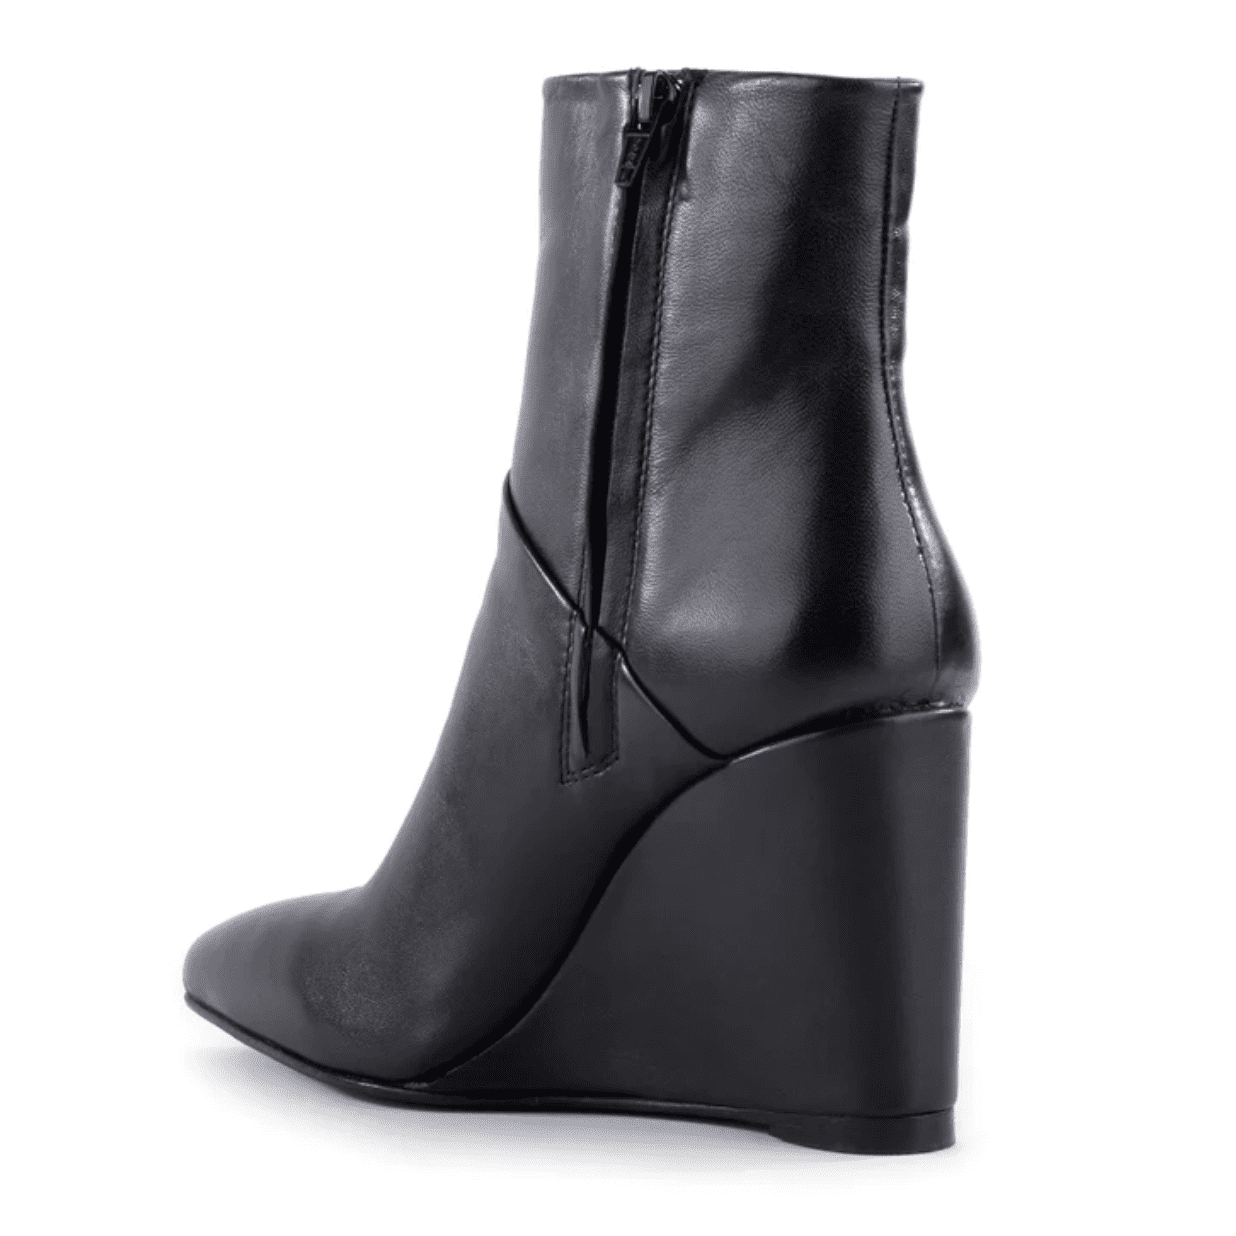 Seychelles Only Girl Wedge Pointed Booties in Black - Jaunts Boutique 